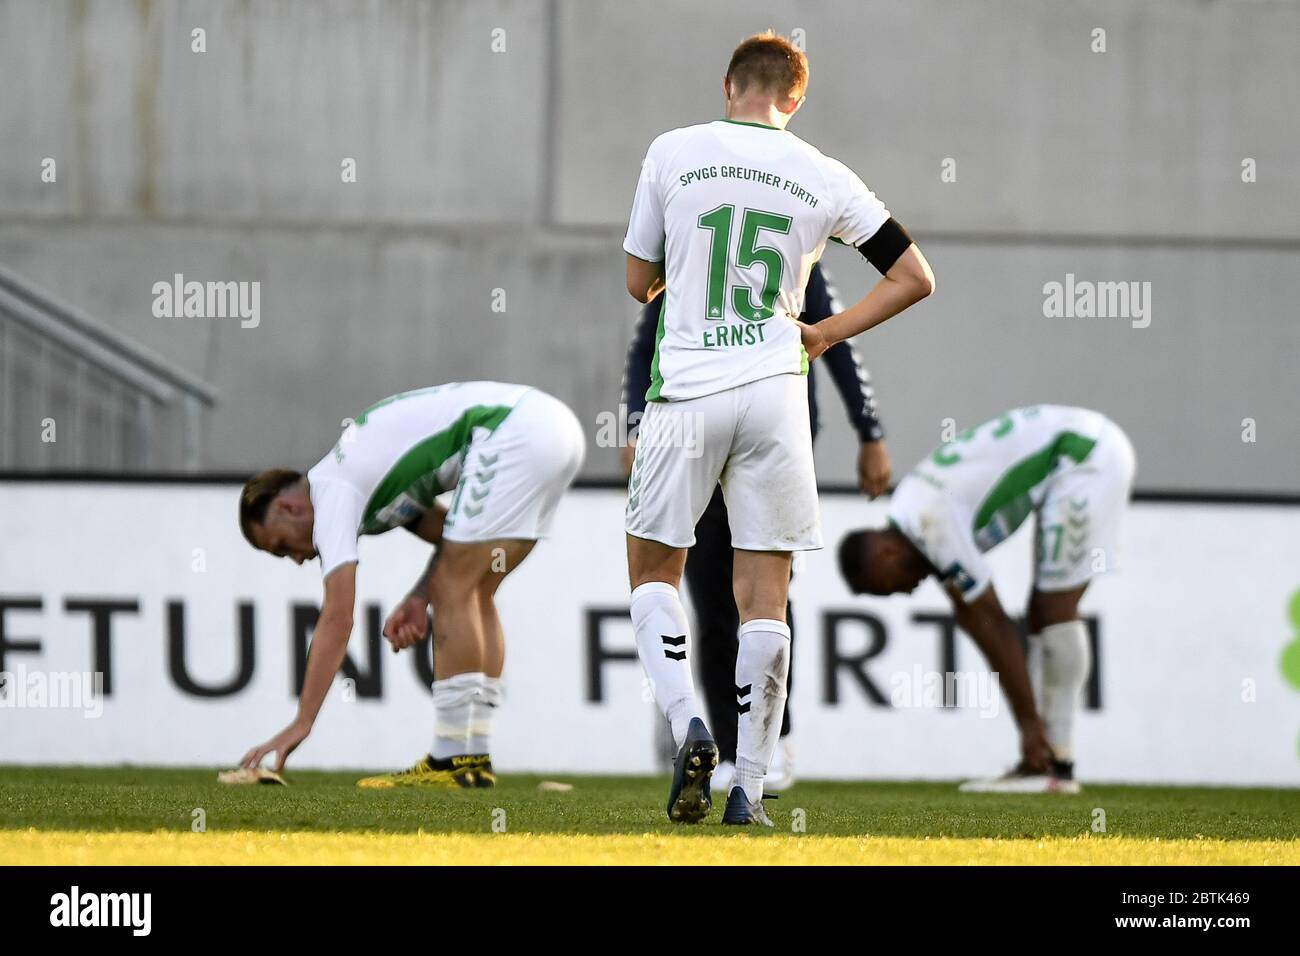 HANDOUT - 26 May 2020, Bavaria, Fürth: Football: 2nd Bundesliga, SpVgg Greuther Fürth - VfL Osnabrück, 28th matchday at the Ronhof Thomas Sommer sports park. Sebastian Ernst von Fürth walks across the pitch. Photo: Lukas Barth-Tuttas/epa-POOL/dpa - only for use in accordance with contractual agreement Stock Photo